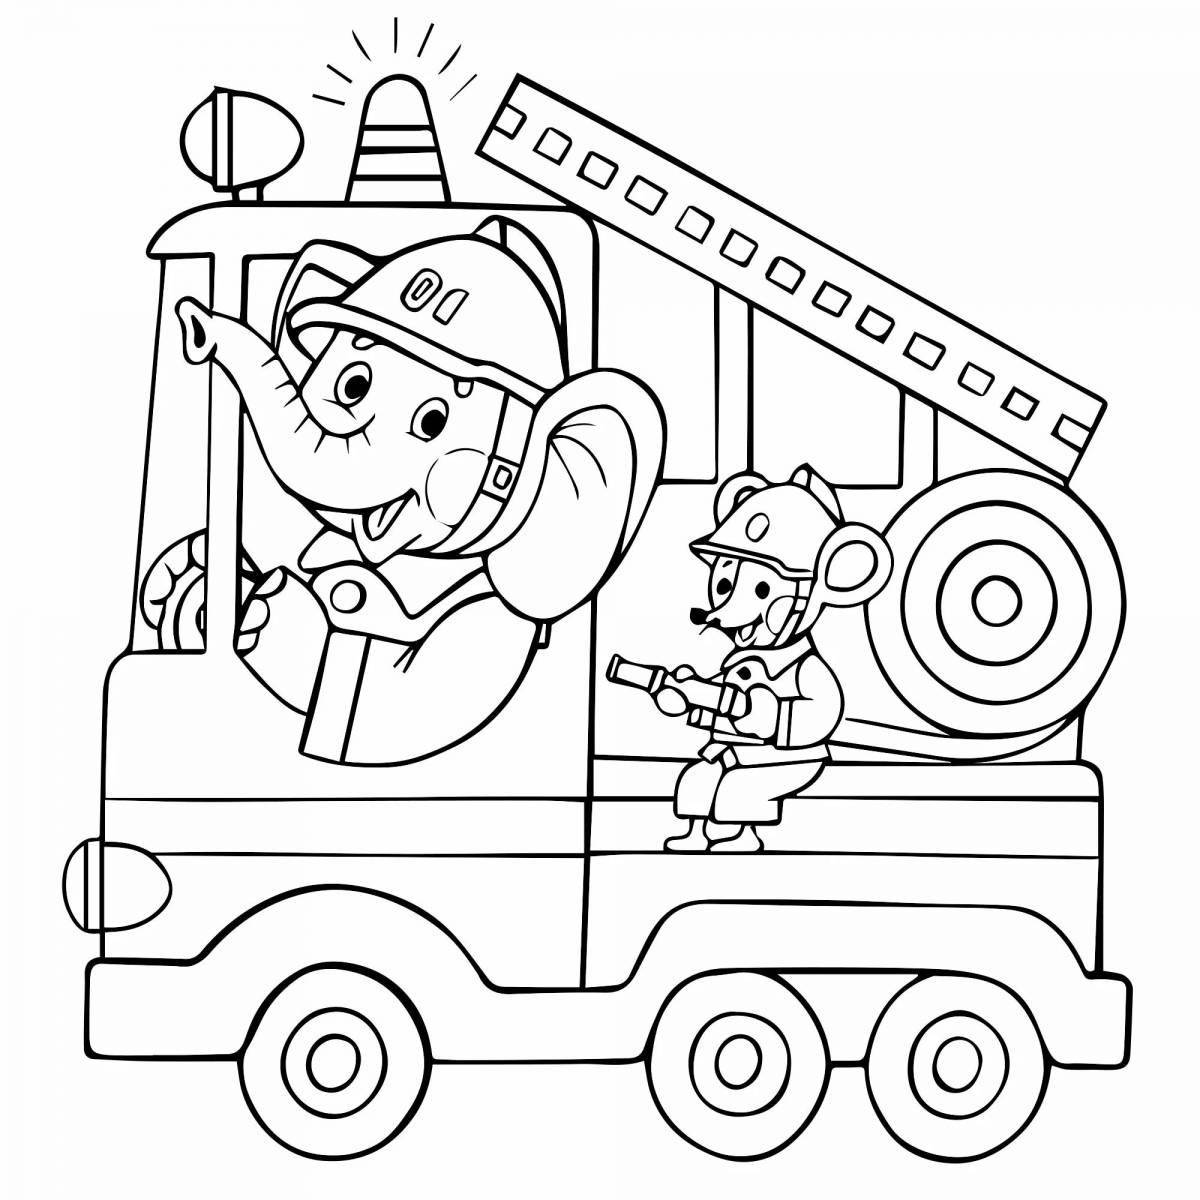 Creative fire safety coloring book